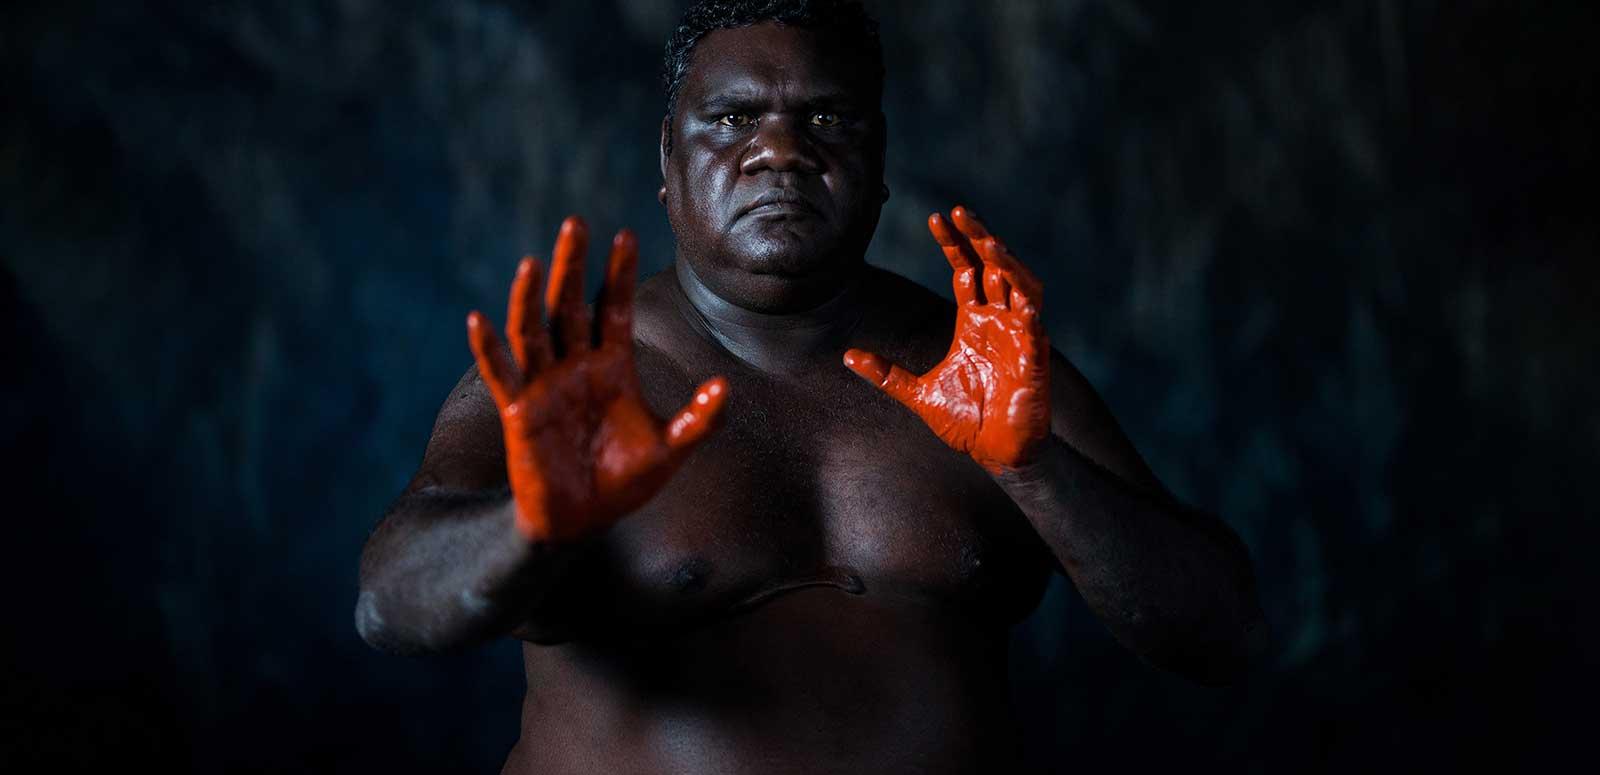 A First Nations man pictured from the waist up with his hands out in front of him. His hands are covered in red pain and he is looking directly at the camera. He is pictured against a dark background. 